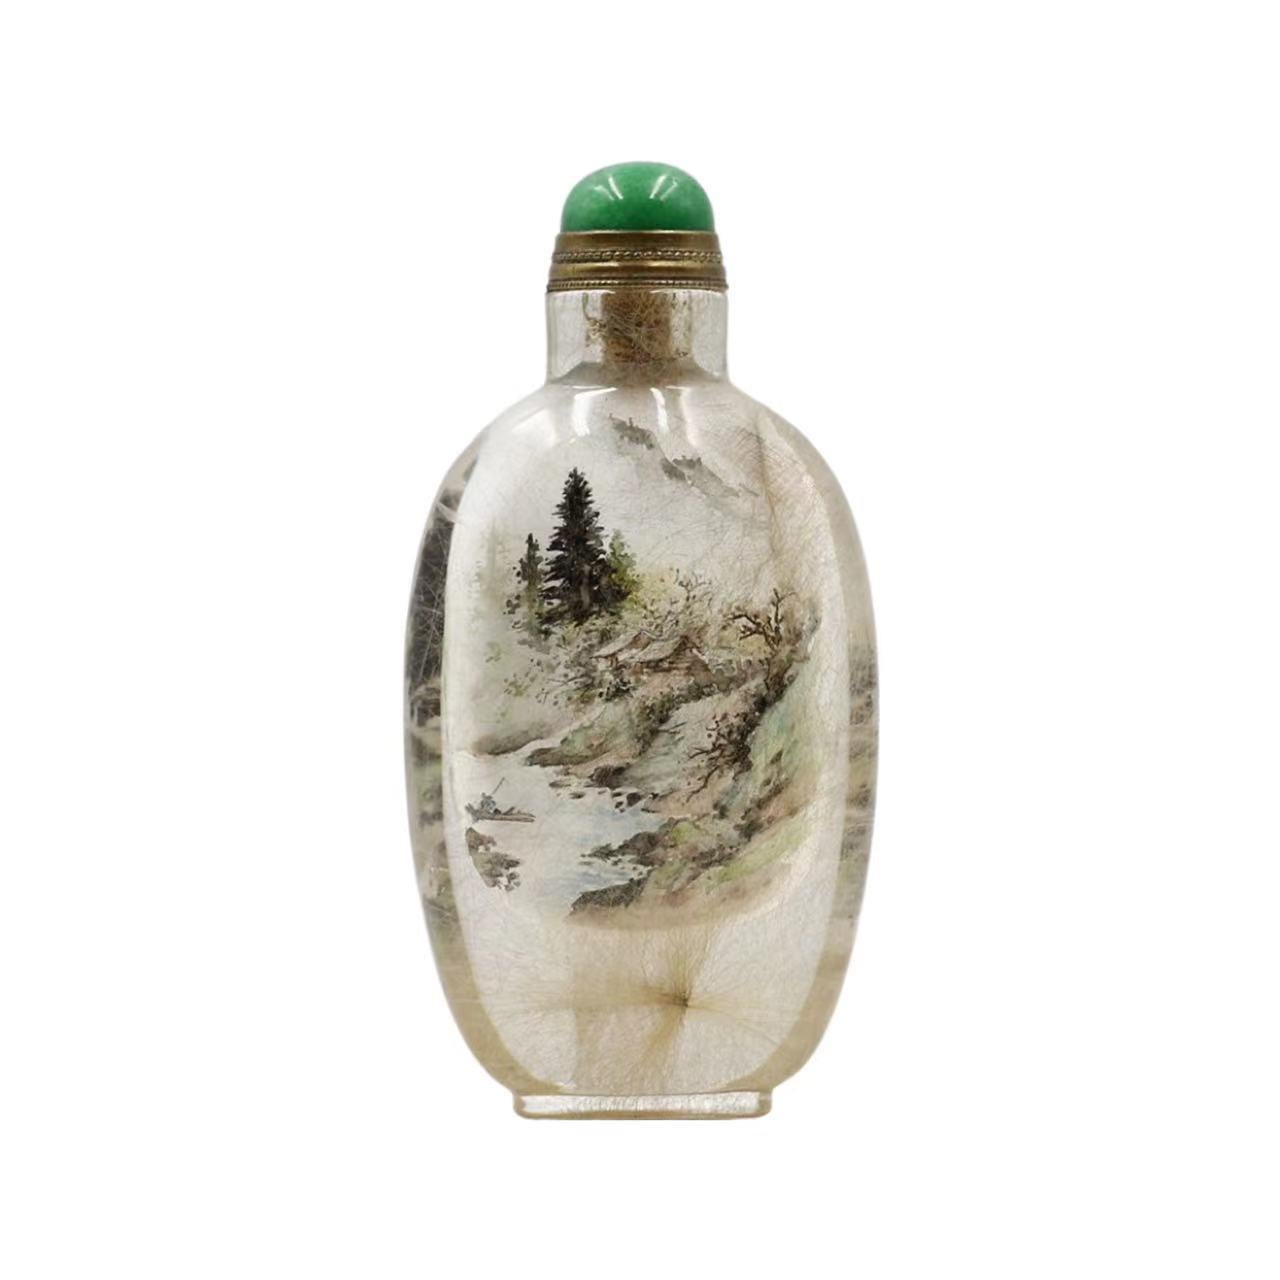 Zhang Zenglou was born in Hebei Province in 1956. He is a master of contemporary Chinese inside painted snuff bottle in Ji school. He is currently a researcher at the China Academy of Art, chairman of the Hebei Provincial Institute of Inside